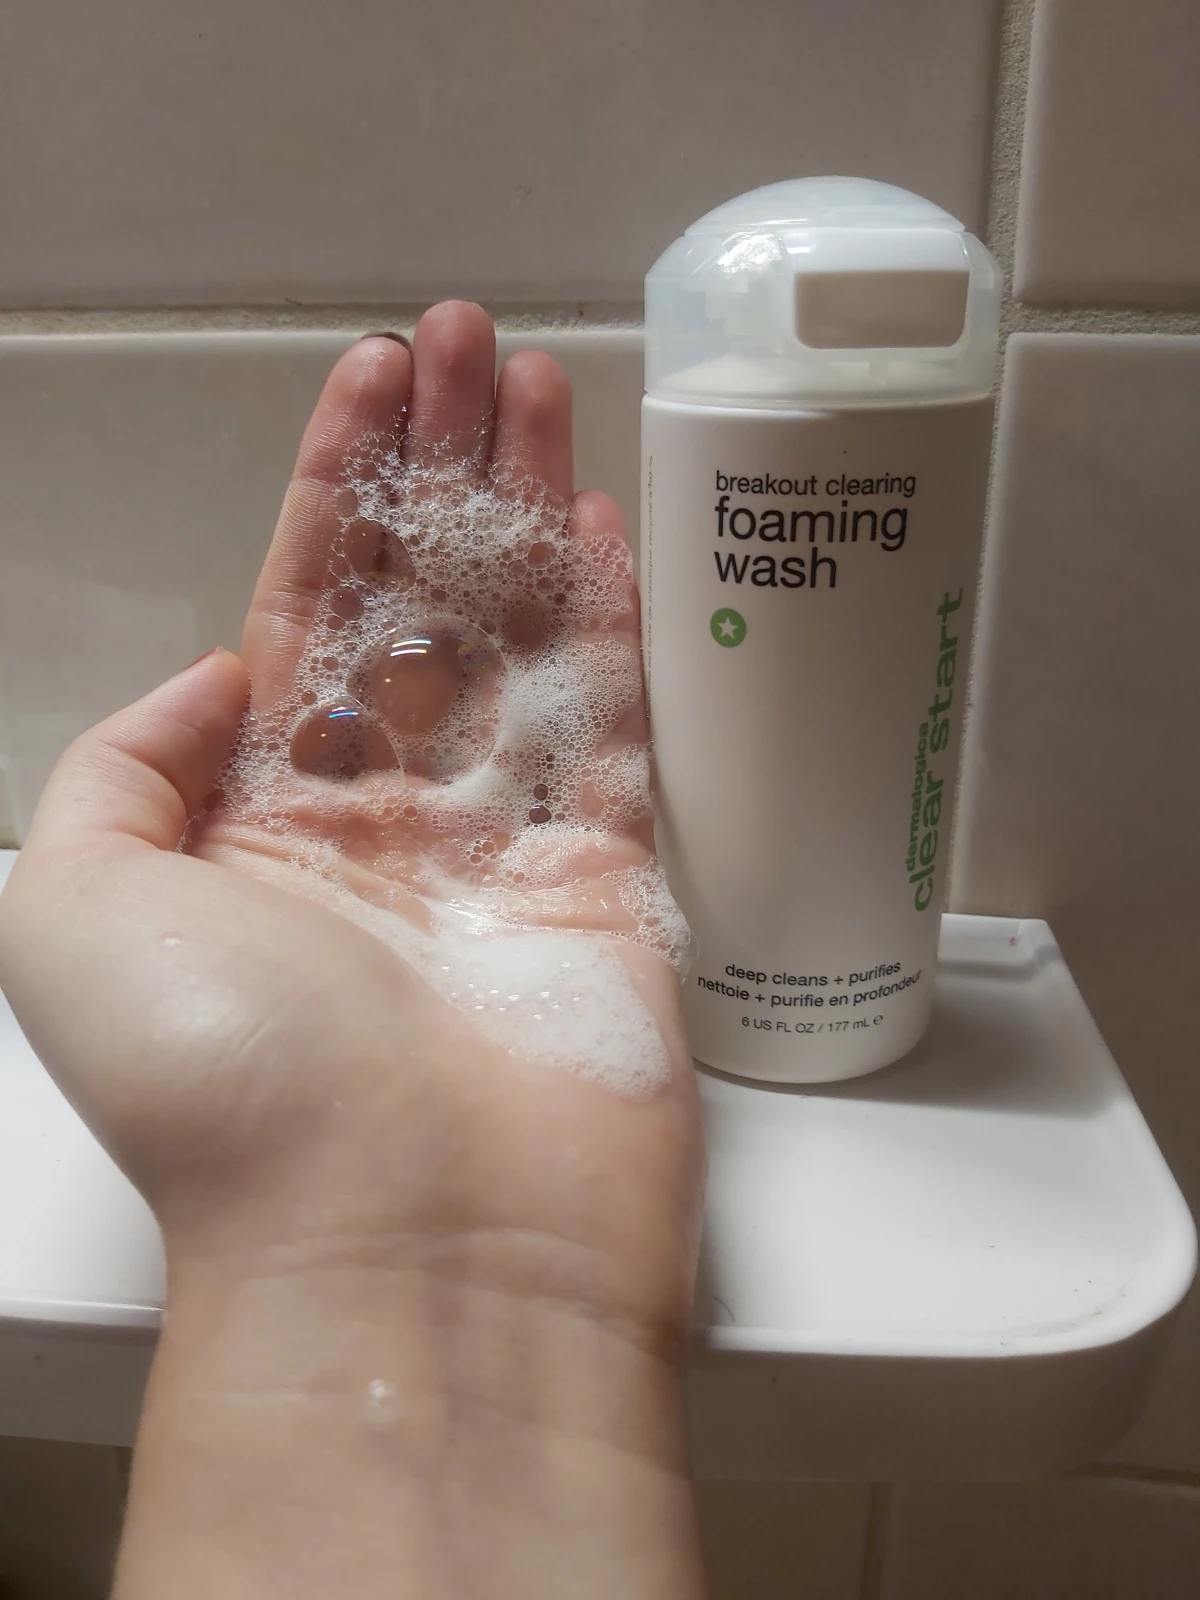 Breakout Clearing Foaming Wash - review image